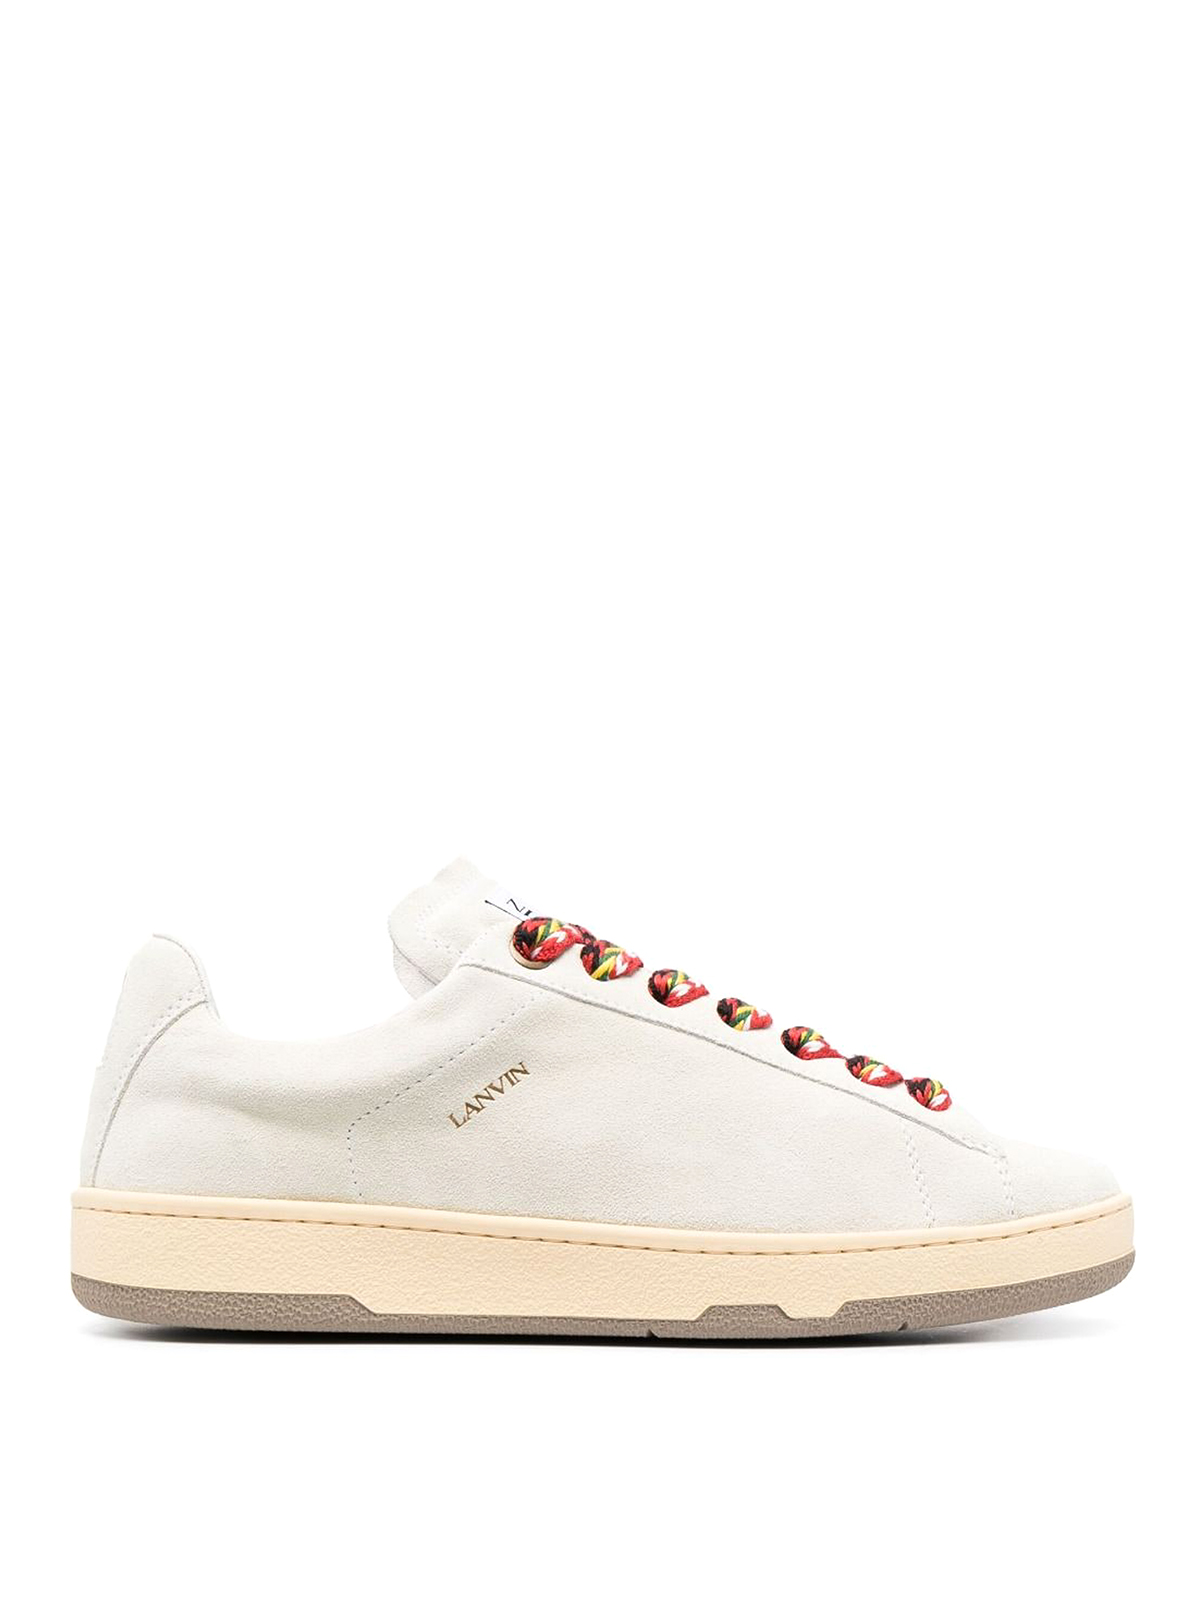 Lanvin Lite Curb Leather Sneakers In White